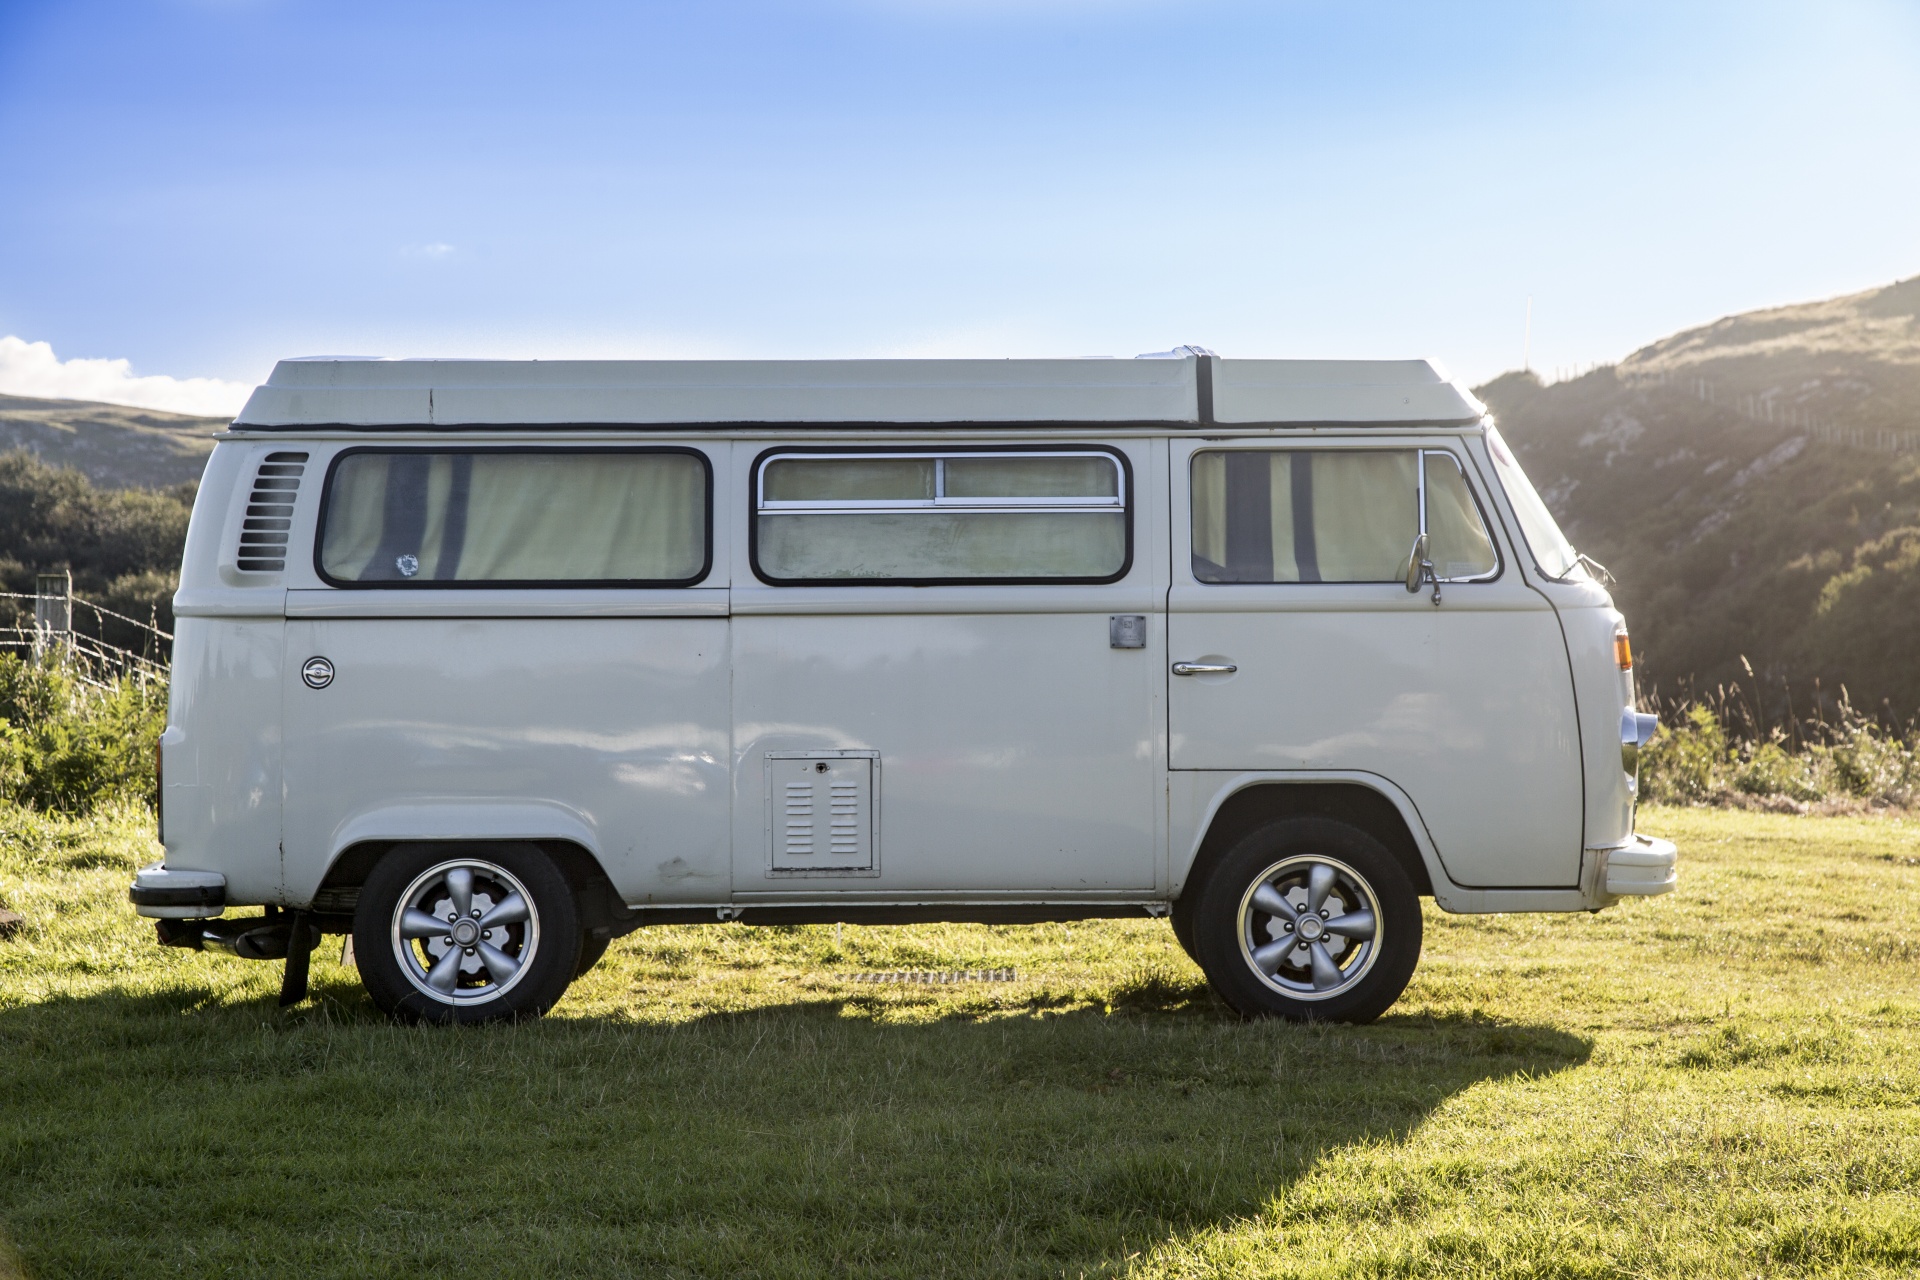 Soon, Cannabis Lovers In Oregon Will Have Their Own RV 